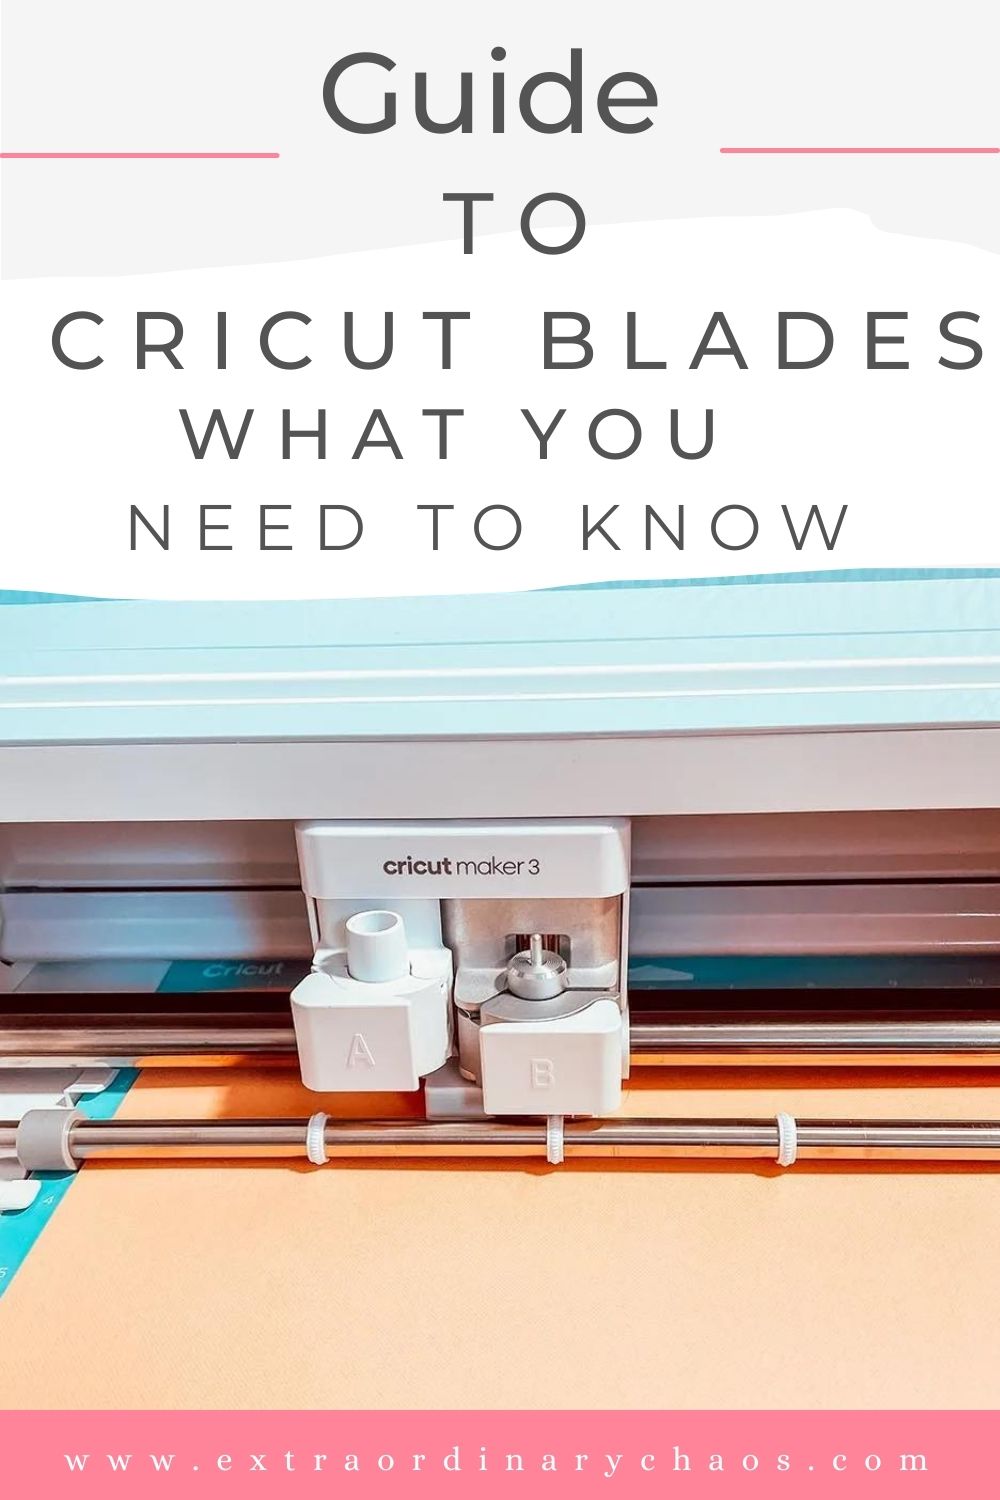 Complete guide to Cricut Blades, what you need to know